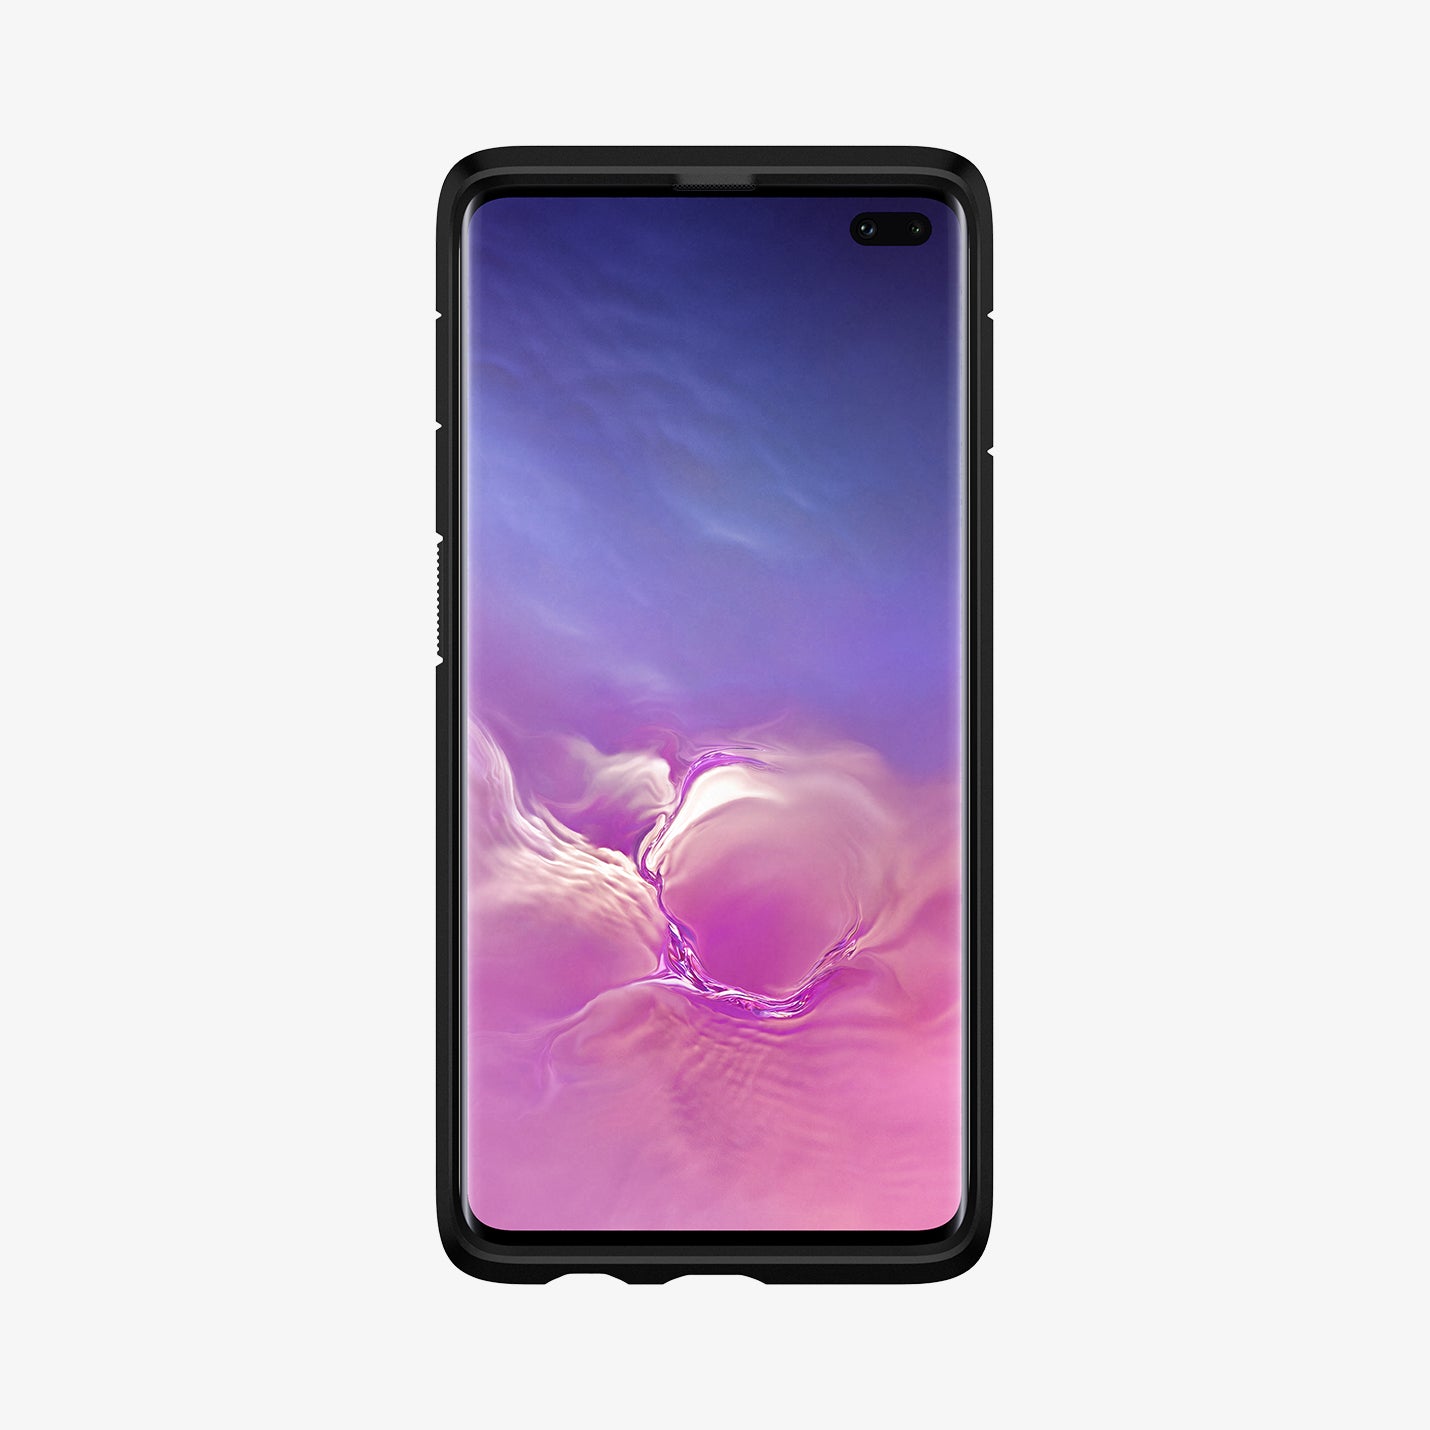 606CS25770 - Galaxy S10 Plus Tough Armor Case in black showing the front